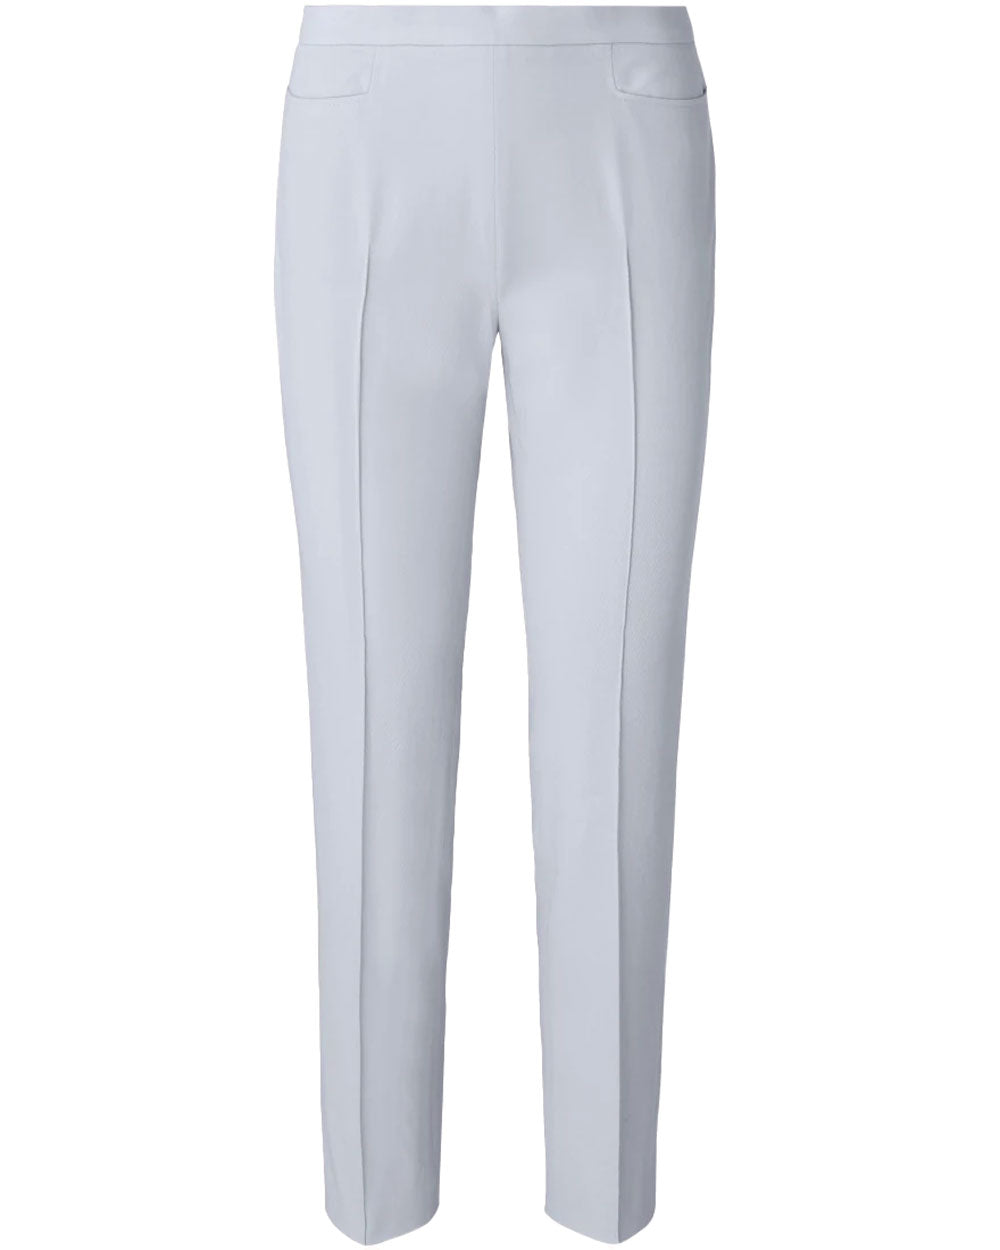 White Straight Ankle Franca Pant